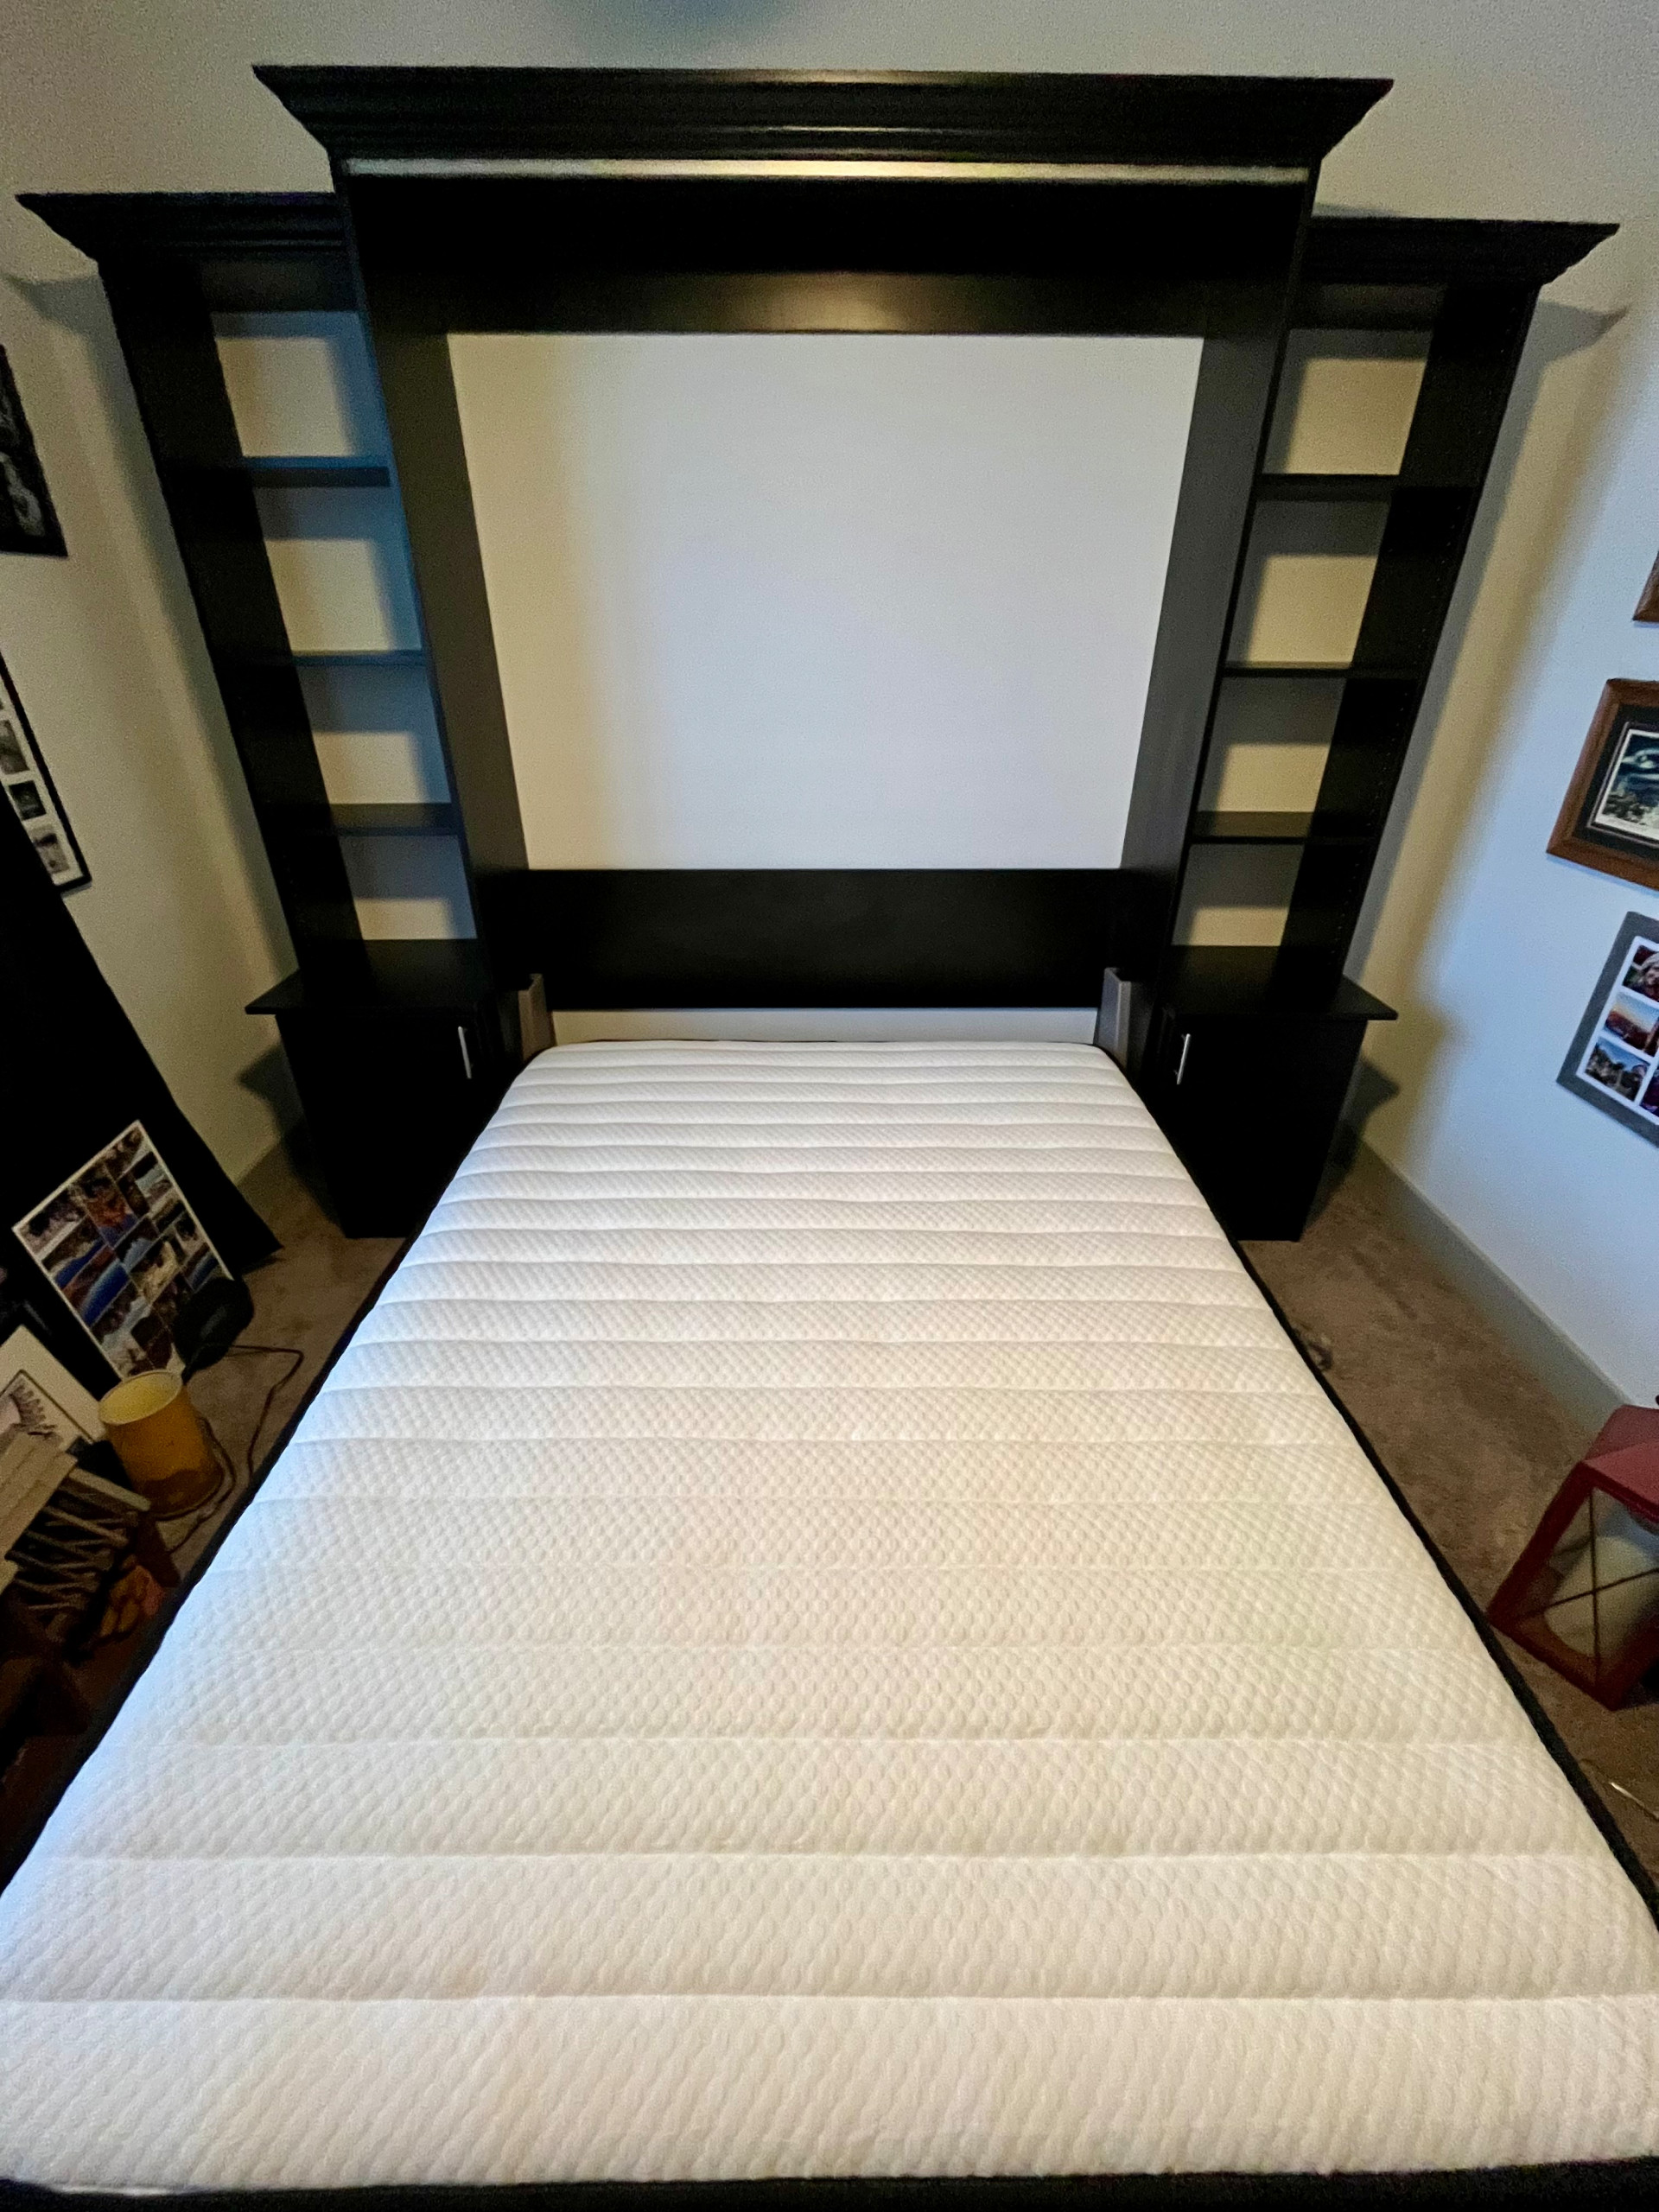 Murphy Bed with Shelving on Either Side